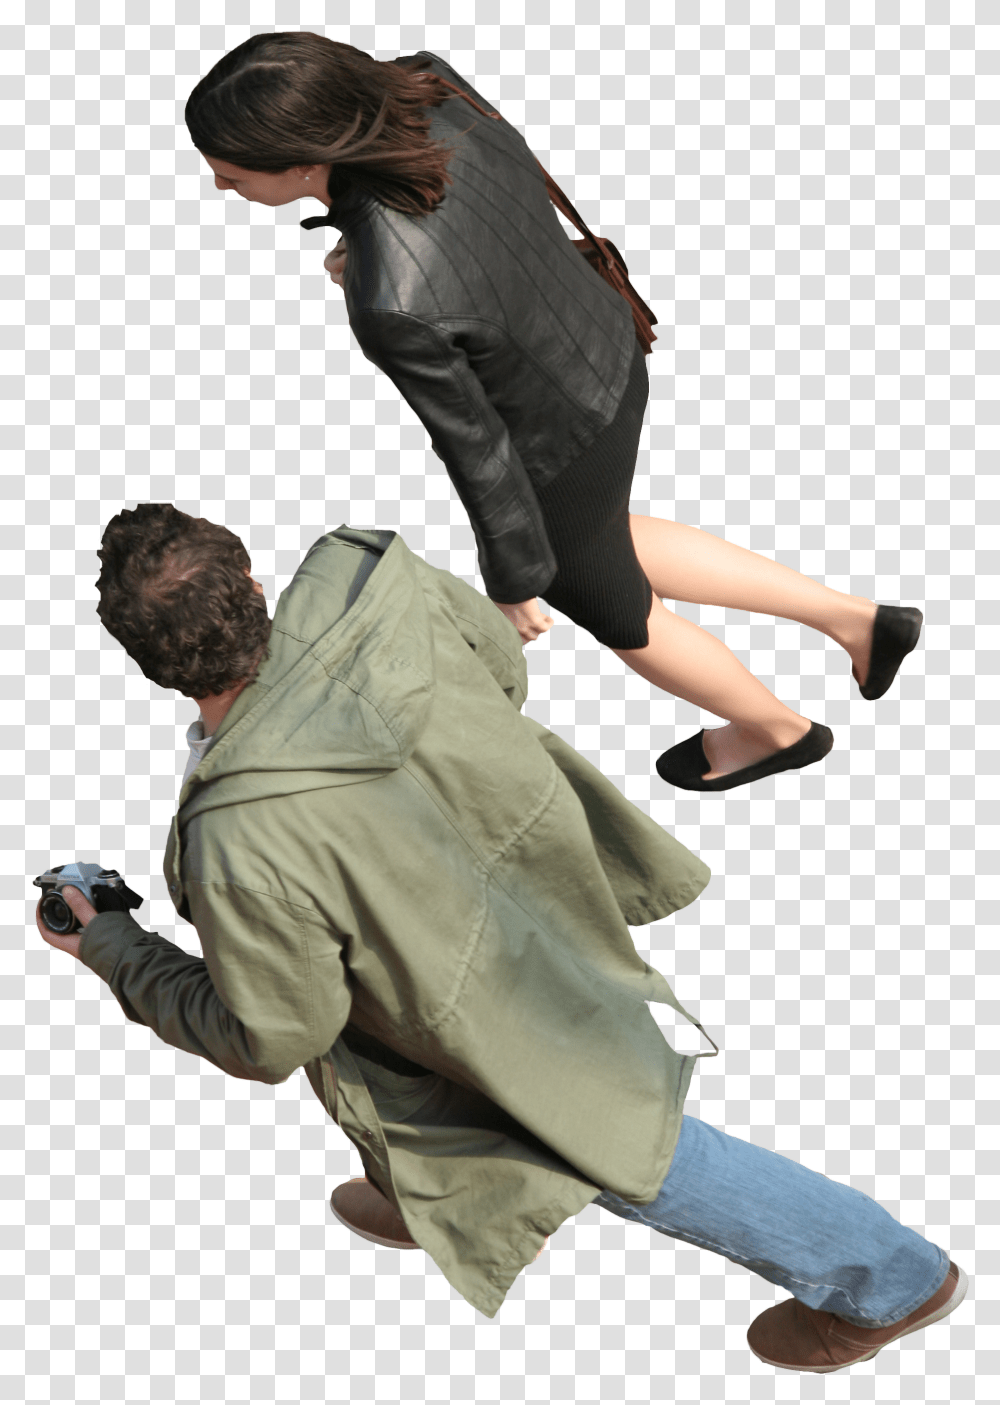 Man And Woman Free Cut Out People Trees Leaves Cutout People Top View, Clothing, Person, Leisure Activities, Dance Pose Transparent Png